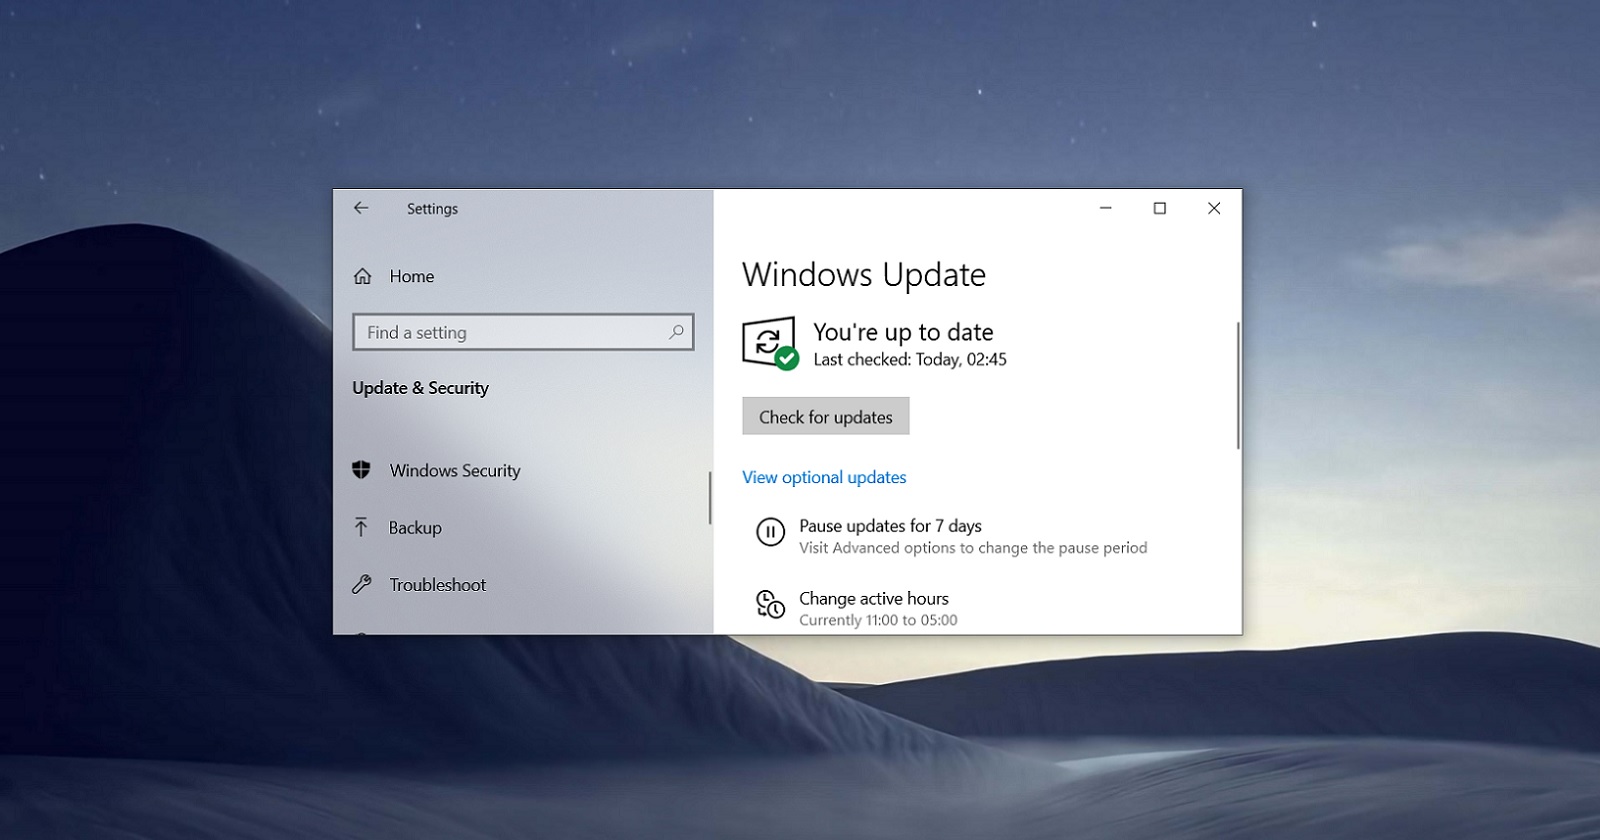 How to download and install the Windows 10 May 2021 Update